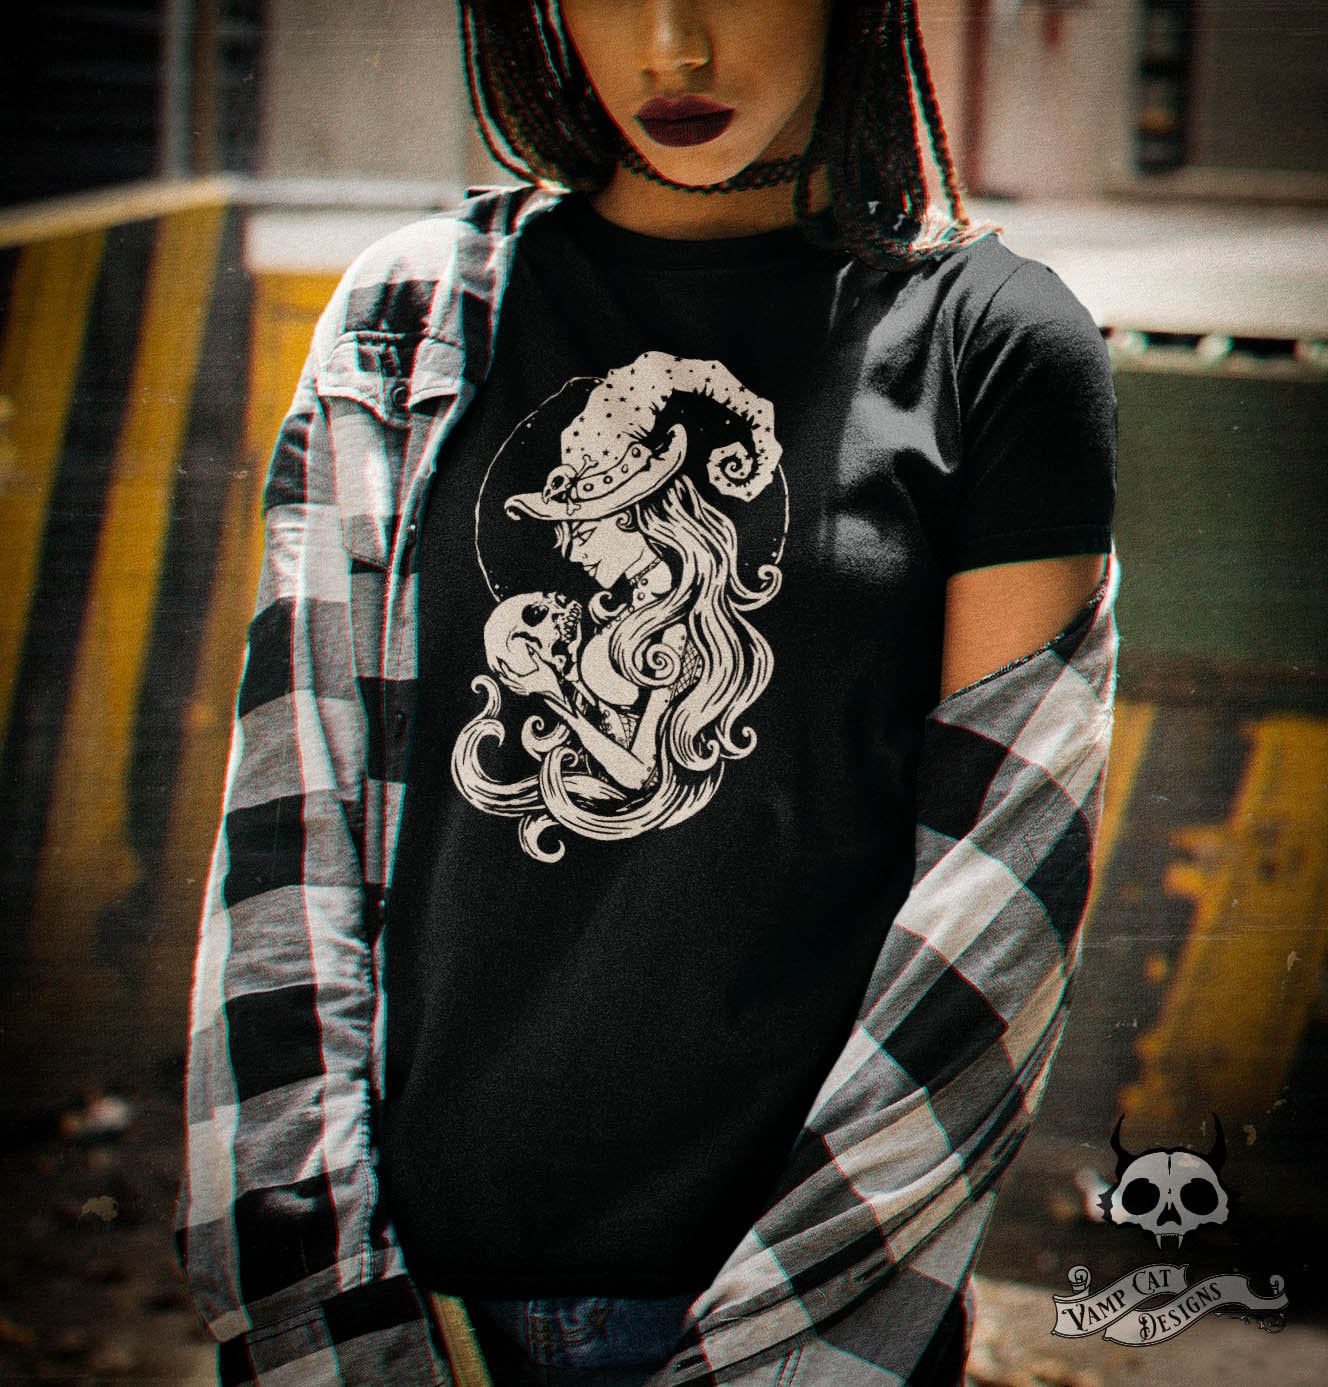 Skull Witch-Women's Tee-Illustration-Art T-shirt-Witchy Art-Gothic Clothing-Graphic Tee-Two Color Variations-Alternative Clothing-Skulls Art